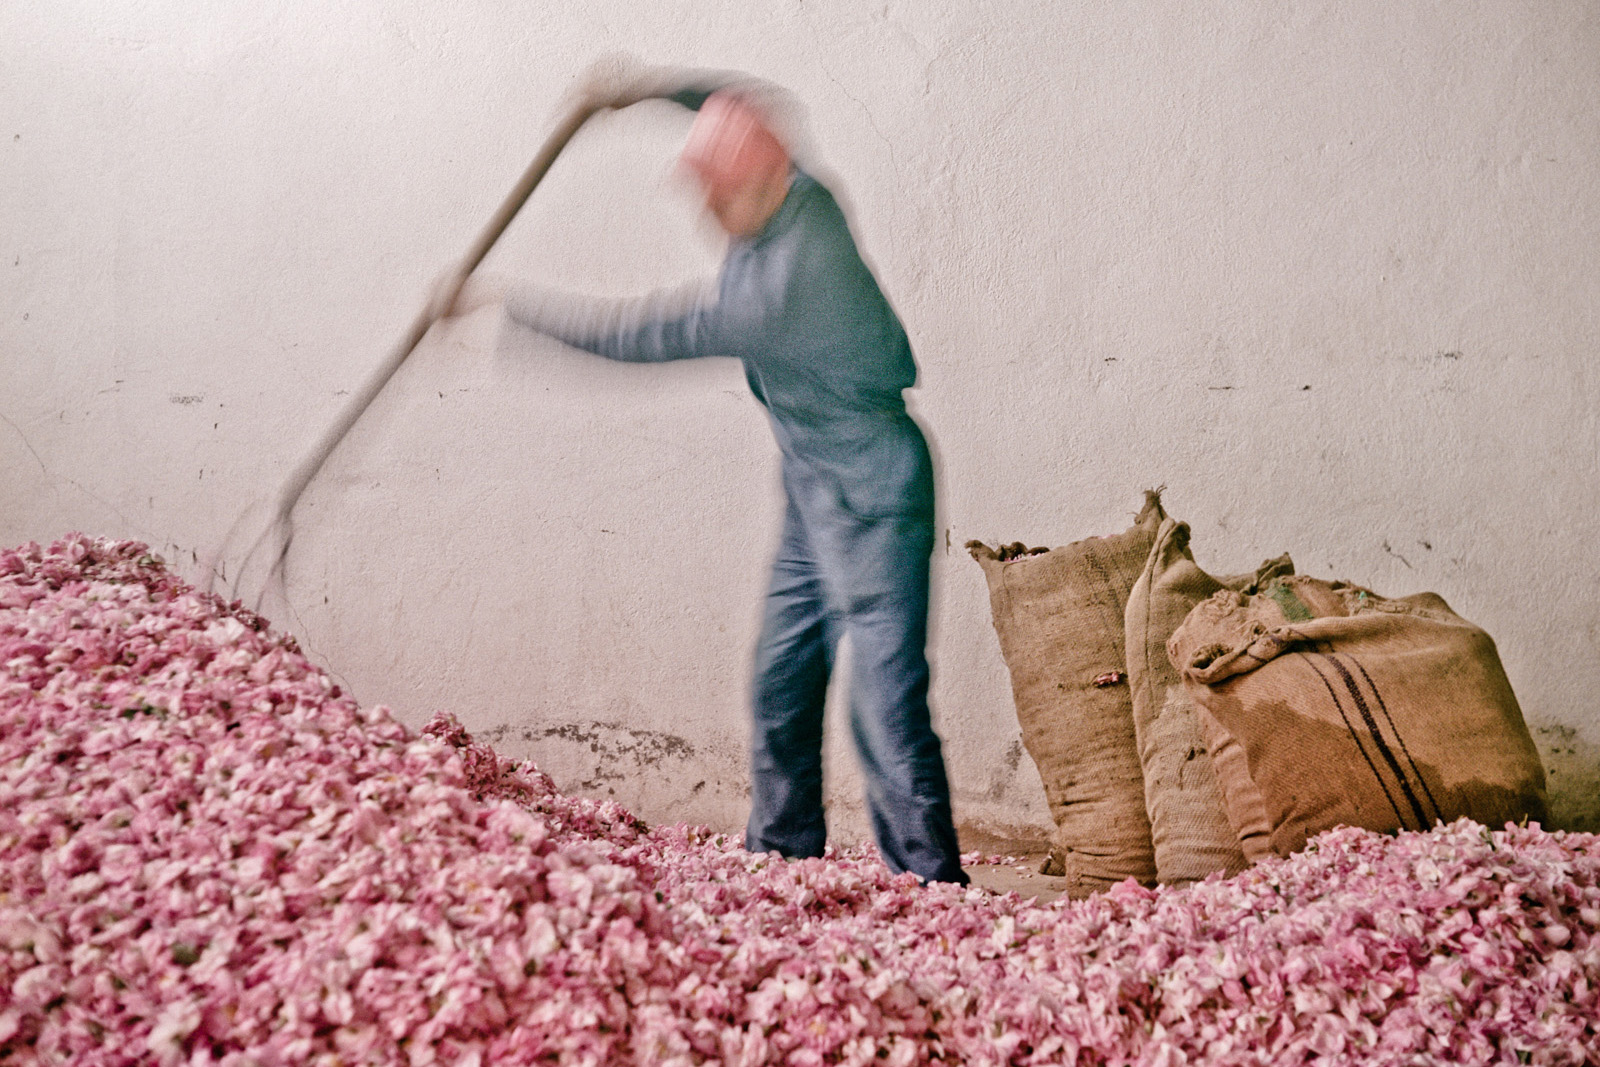 A worker rakes in flowers for perfume extraction.